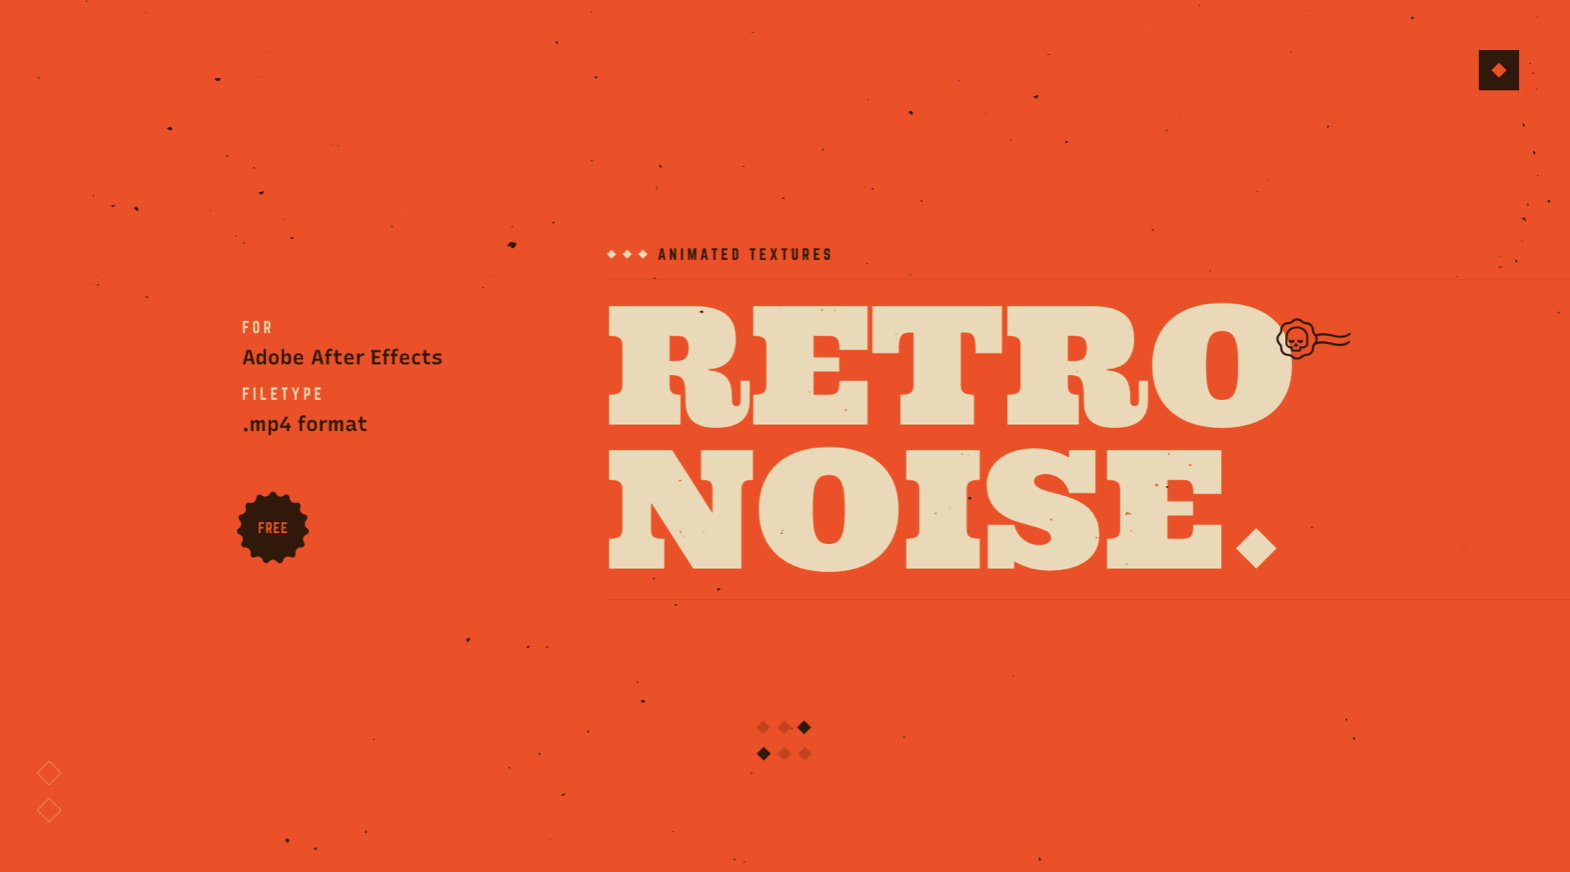 Free Retro noise textures for Adobe After Effects